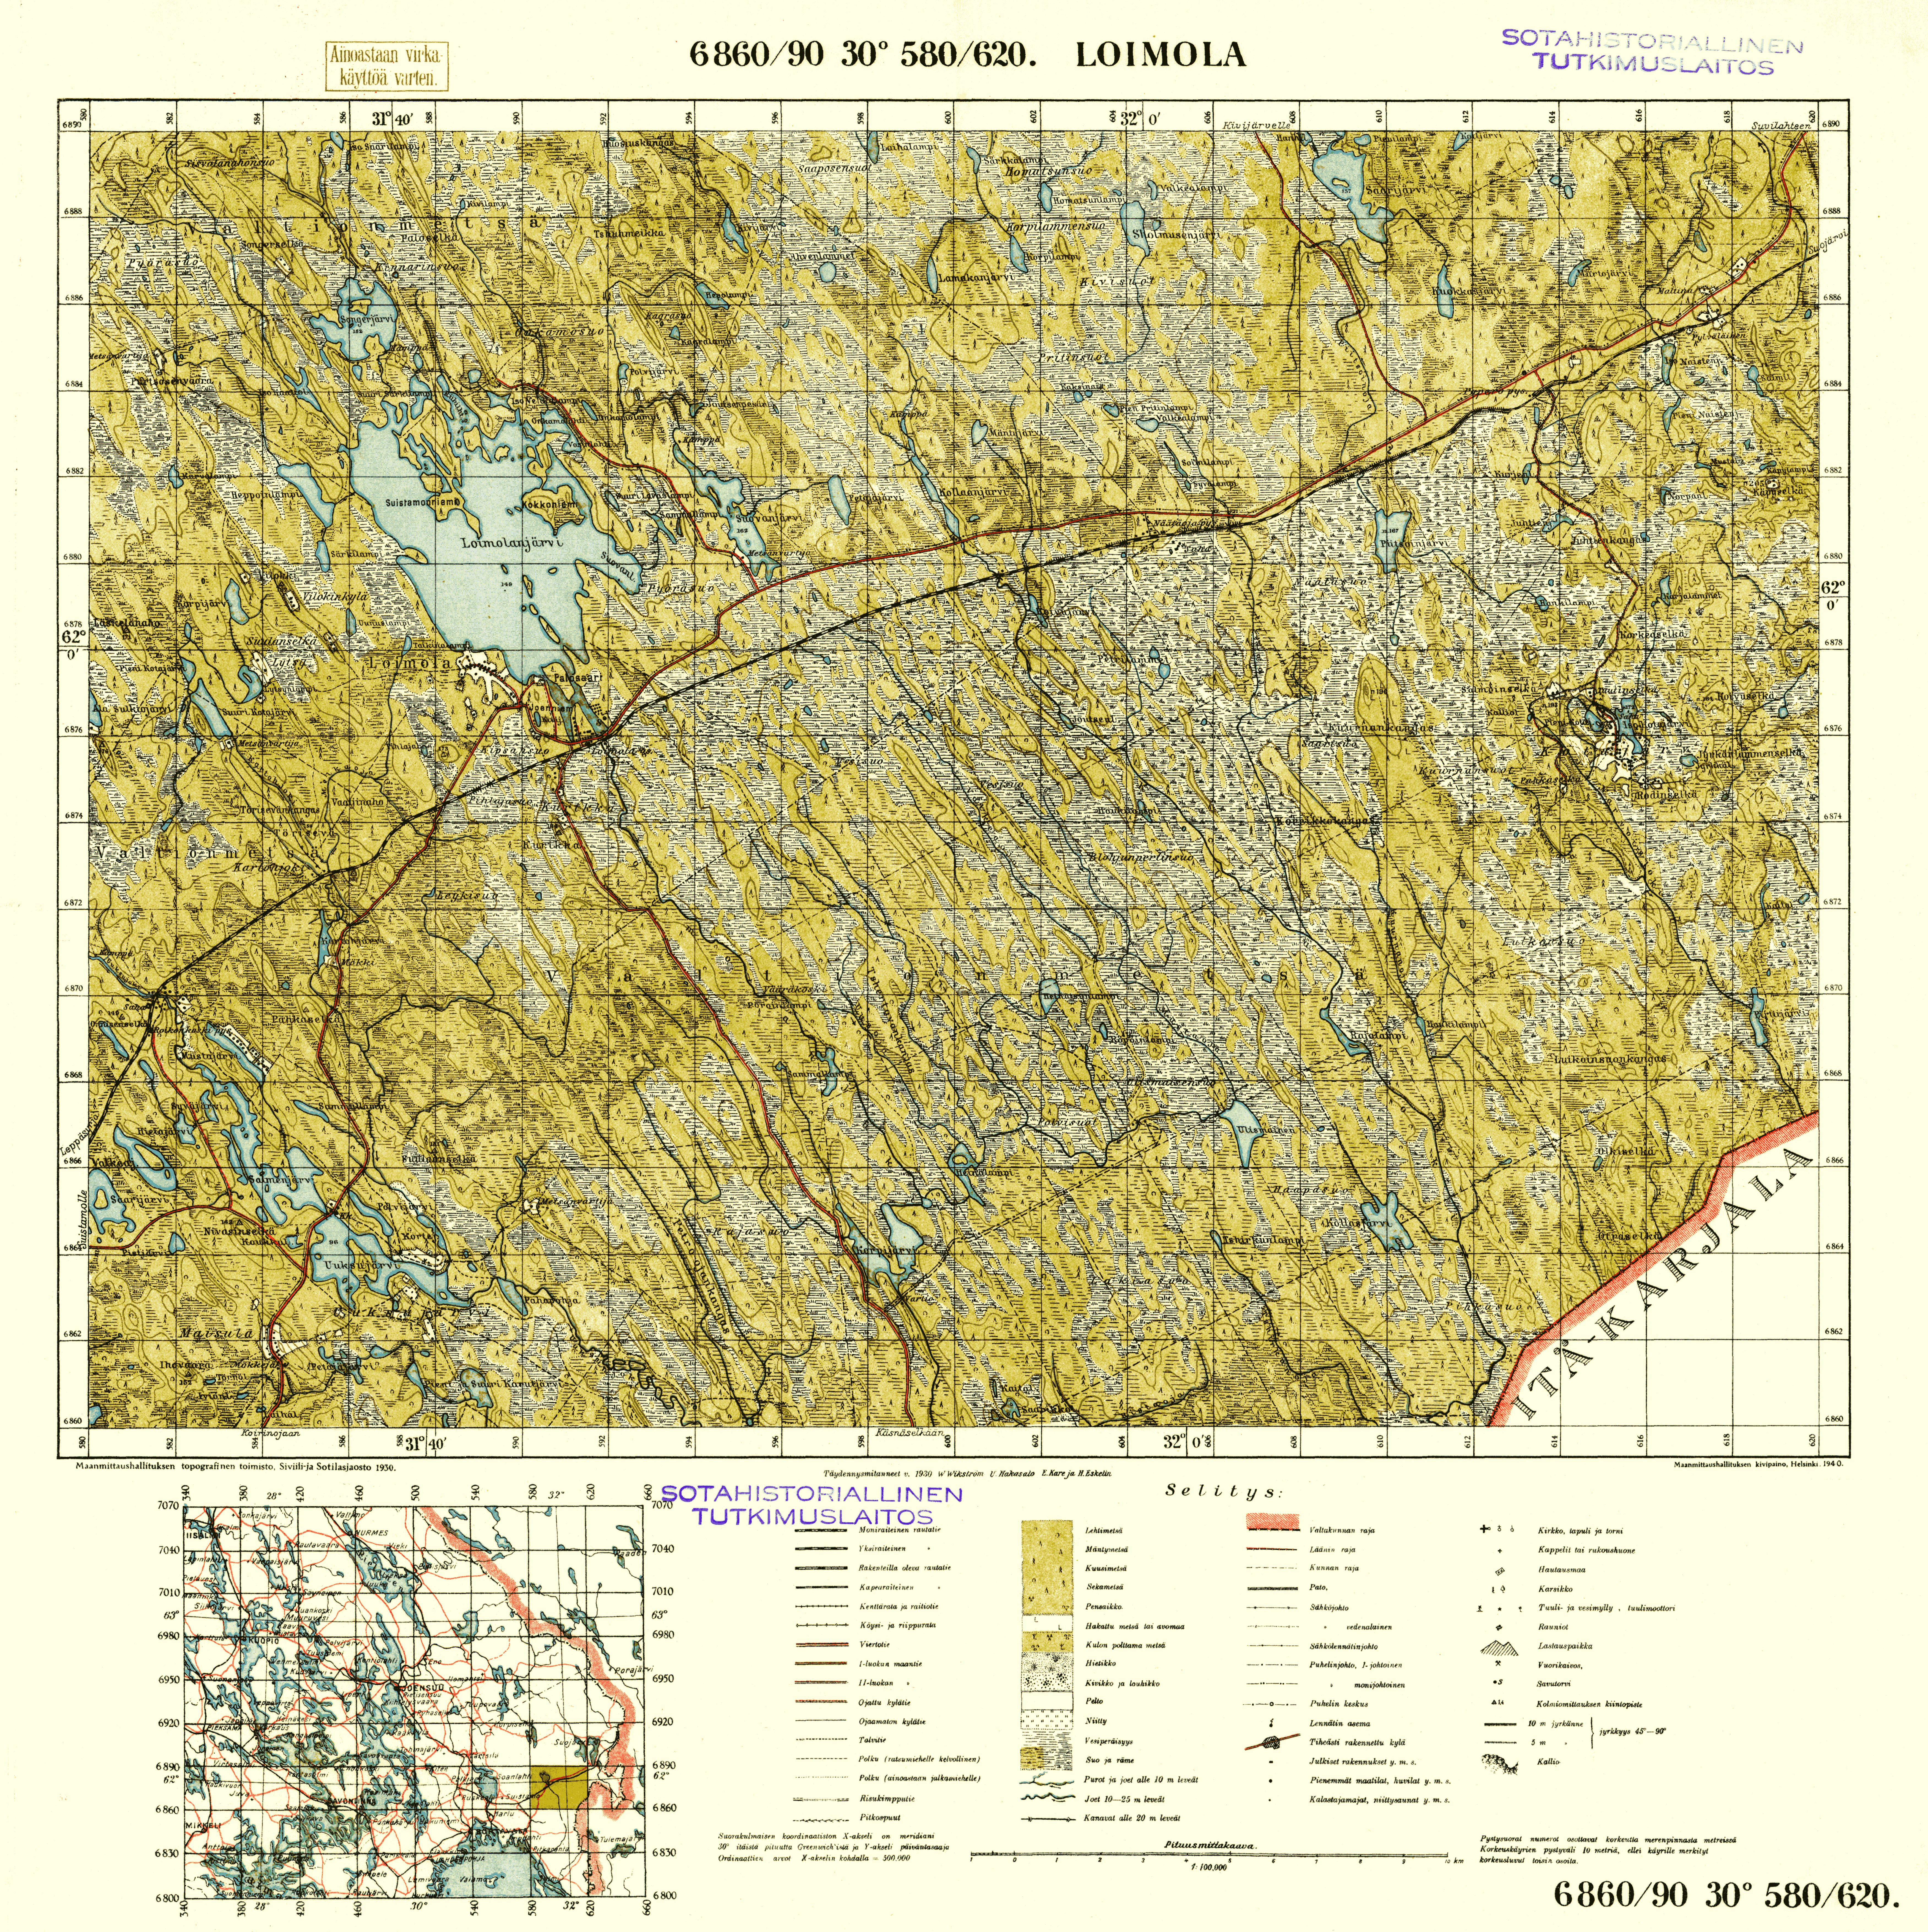 Loimola. Topografikartta 5211. Topographic map from 1940. Use the zooming tool to explore in higher level of detail. Obtain as a quality print or high resolution image